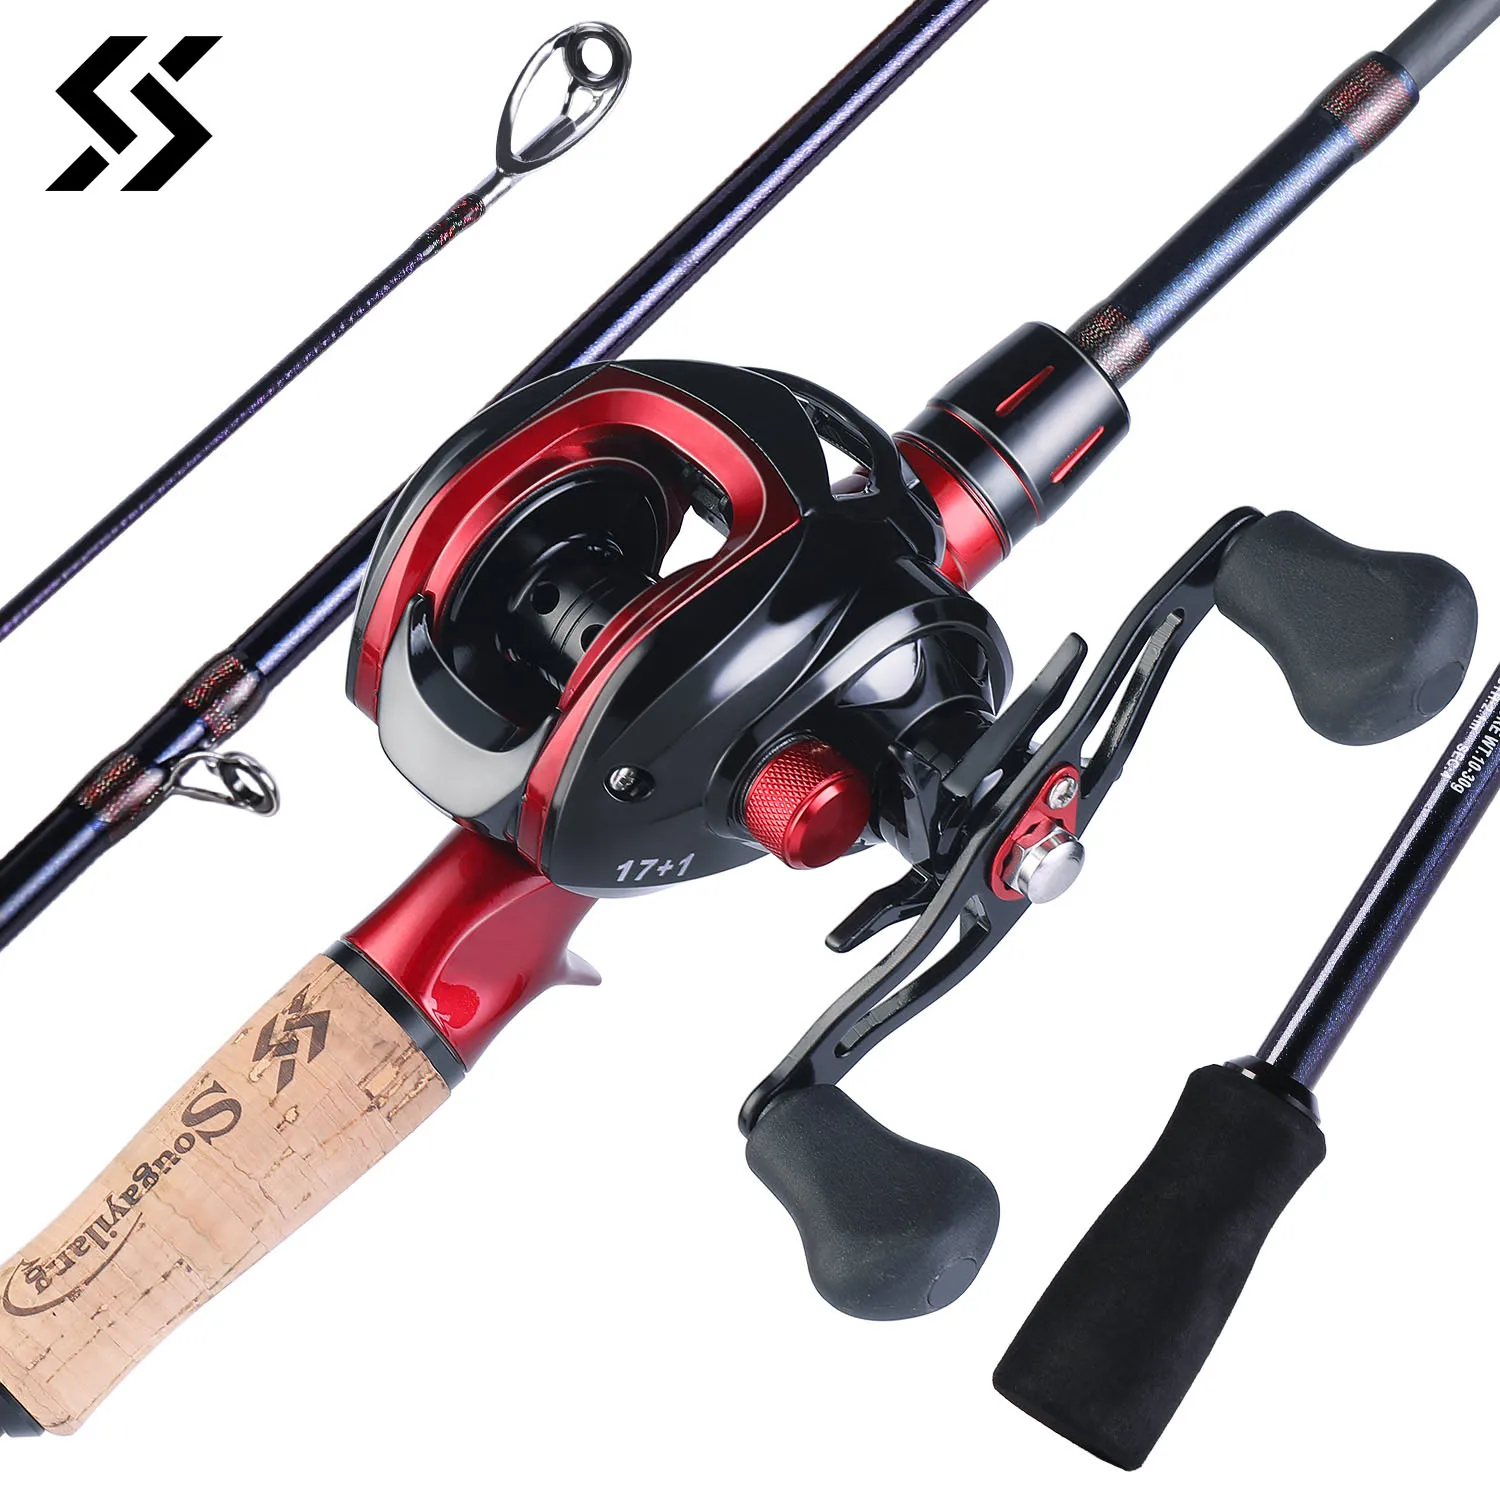 Sougayilang Casting Fishing Rod Combo Carbon Fiber Rod and 7.1:1 Gear Ratio  Fresh Saltwater Magnetic Brake System Reel Pesca